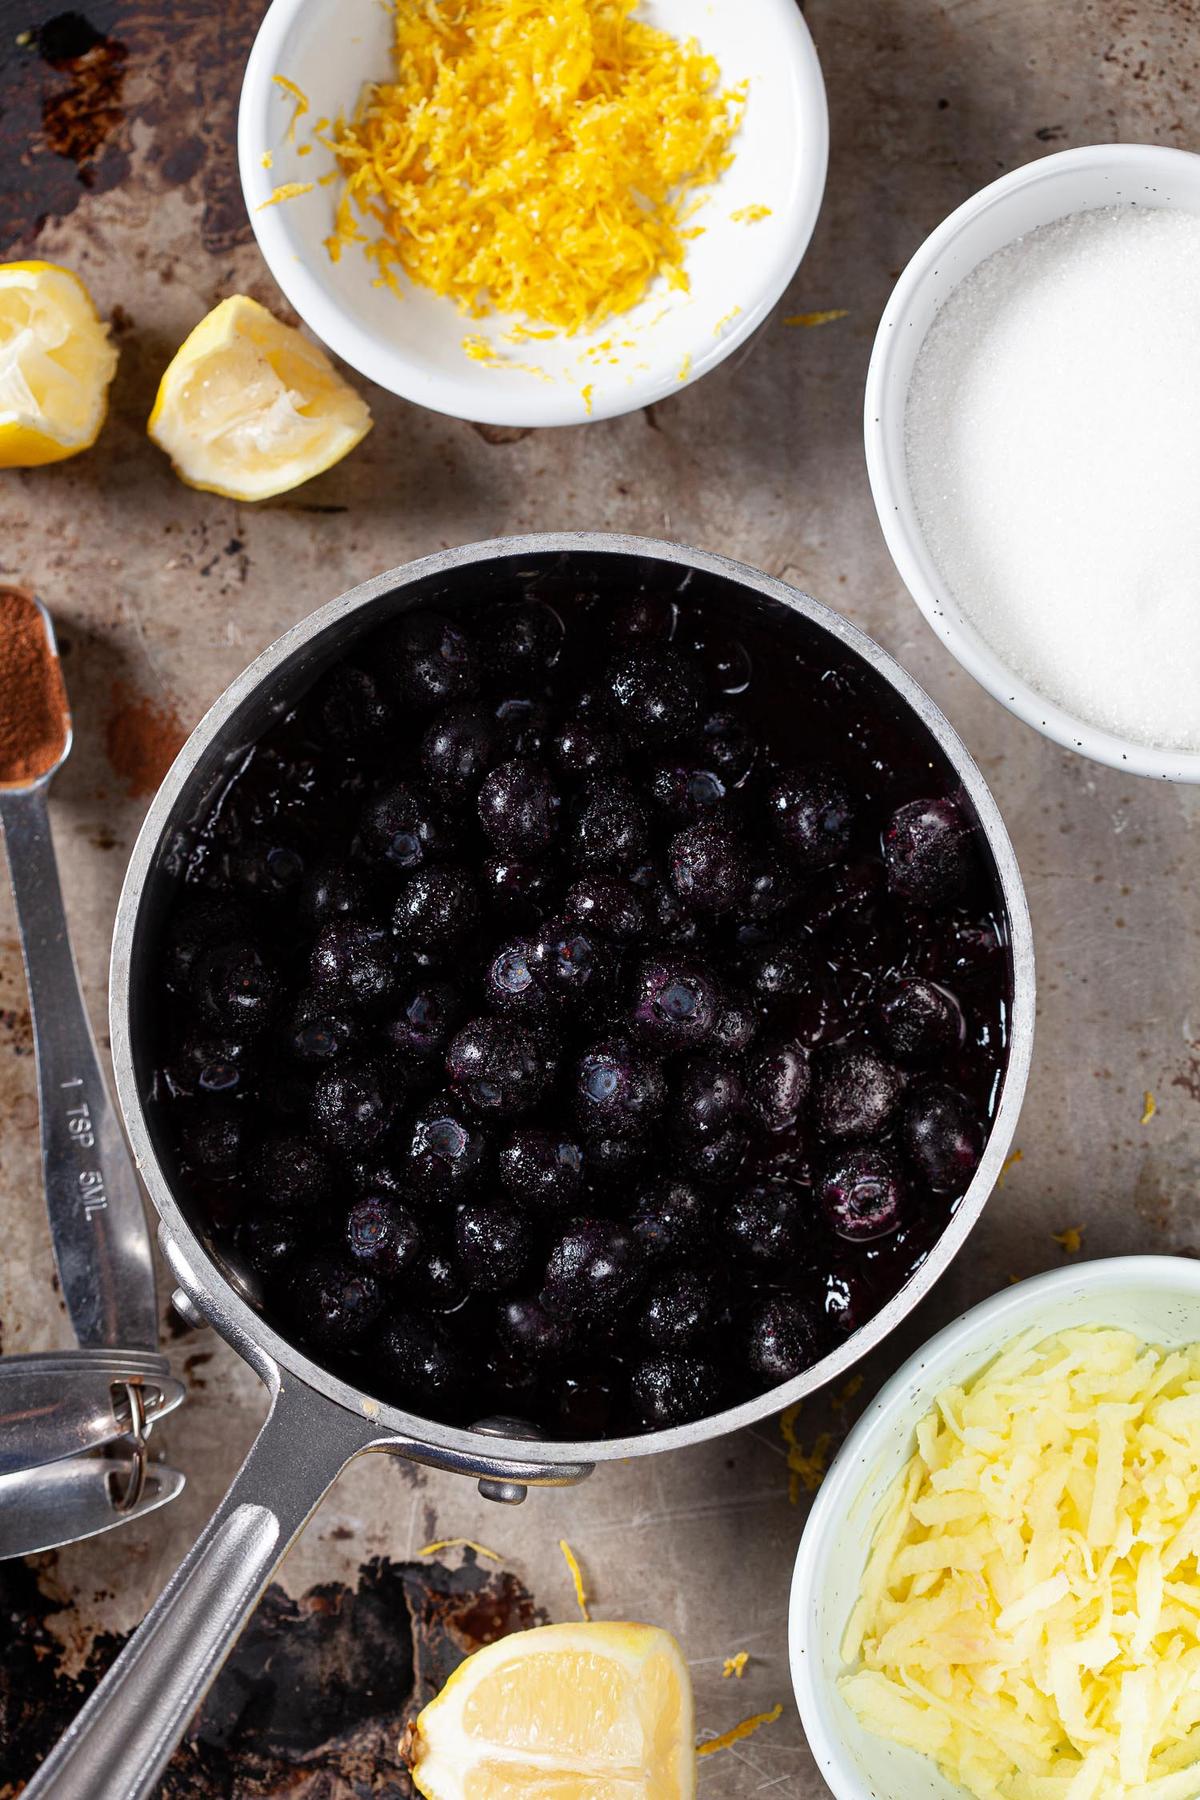 Lemons, apples, and spices make this blueberry pie filling perfect (Courtesy of Amy Dong)